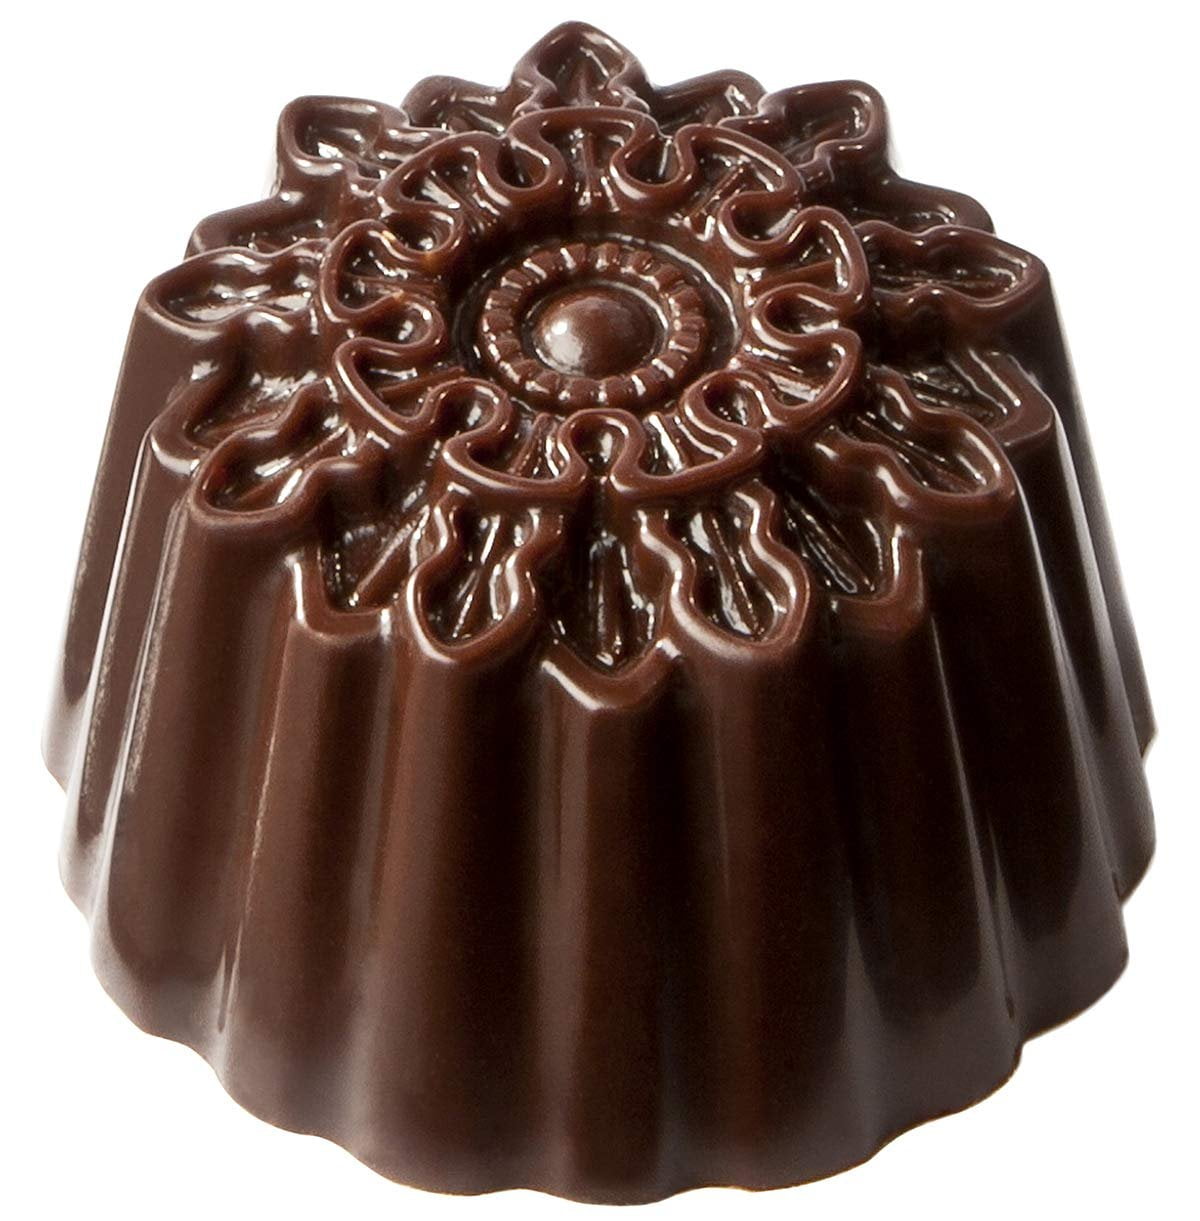 TRUFFLY MADE CLASSIC ROUND MOLD 54 CAVITY  Shop Gourmet Chocolates  Honeycomb Toffee and Candies Online